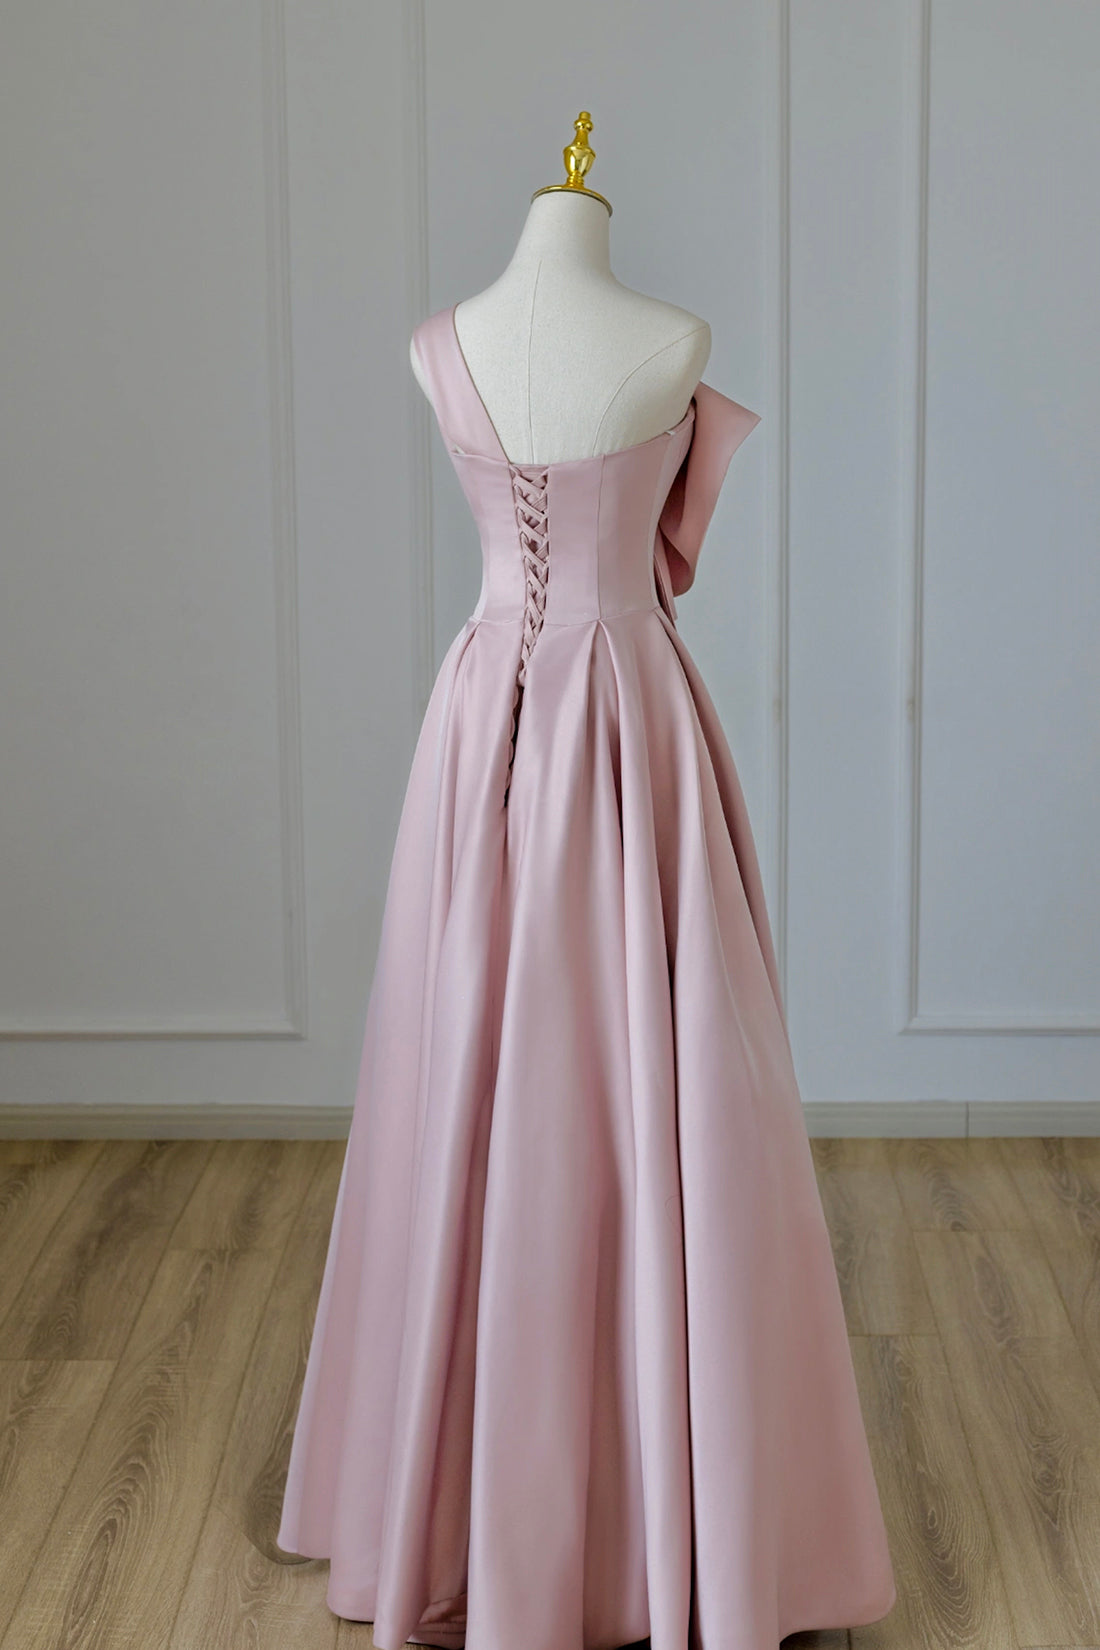 Bridesmaid Dress Custom, Pink Satin Long Prom Dress with Bow, One Shoulder Formal Evening Dress